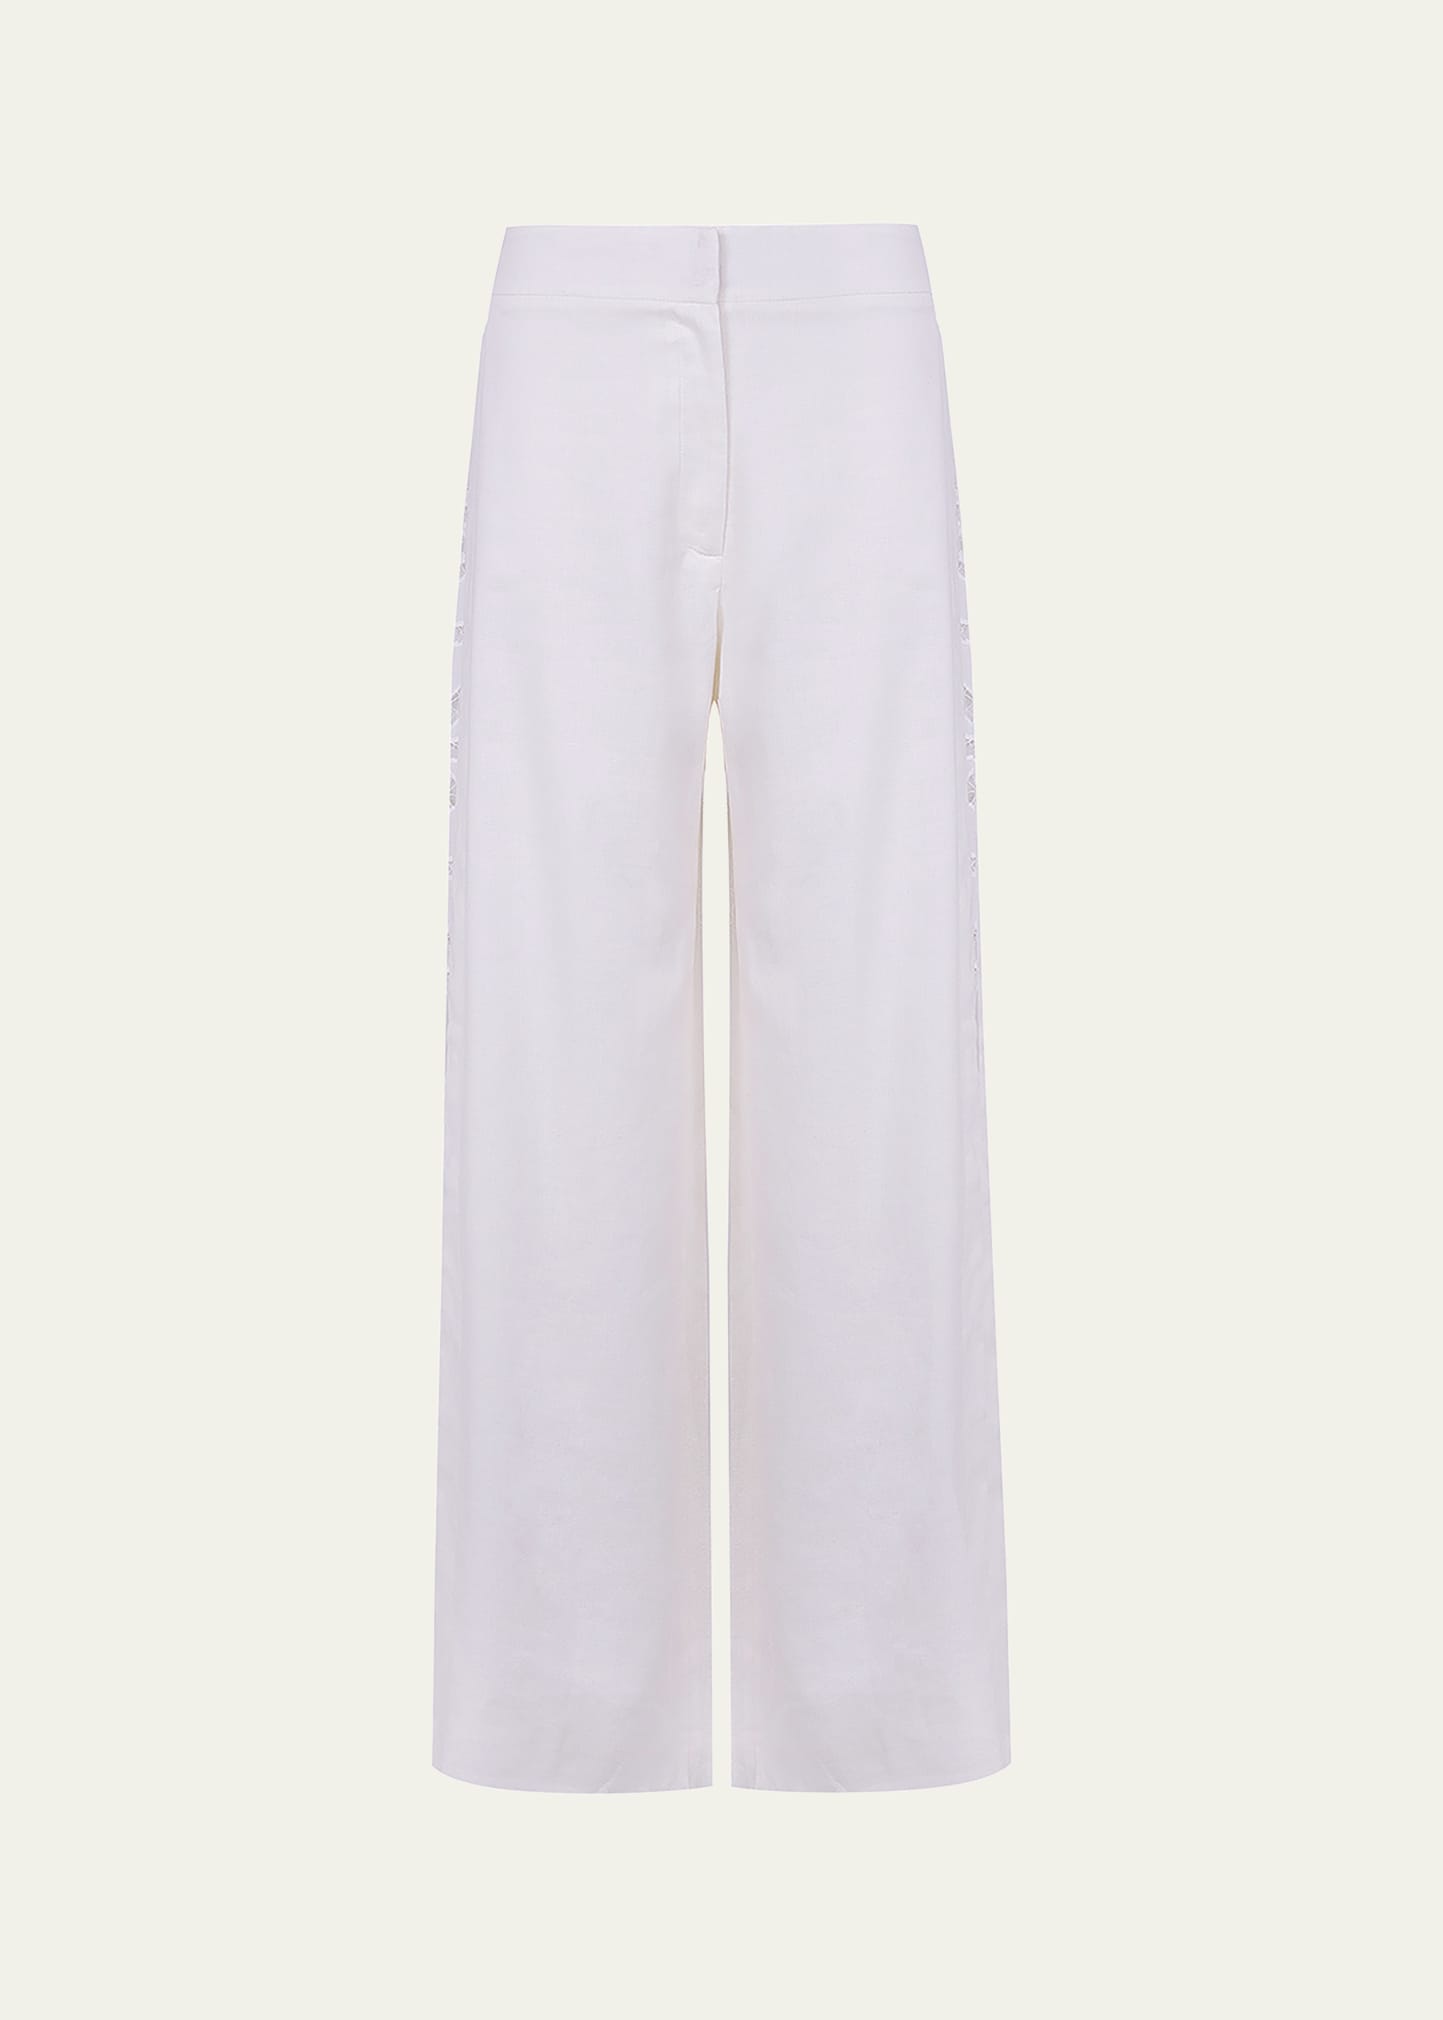 Vix Solid Bree Geometric Embroidered Pants In Off White